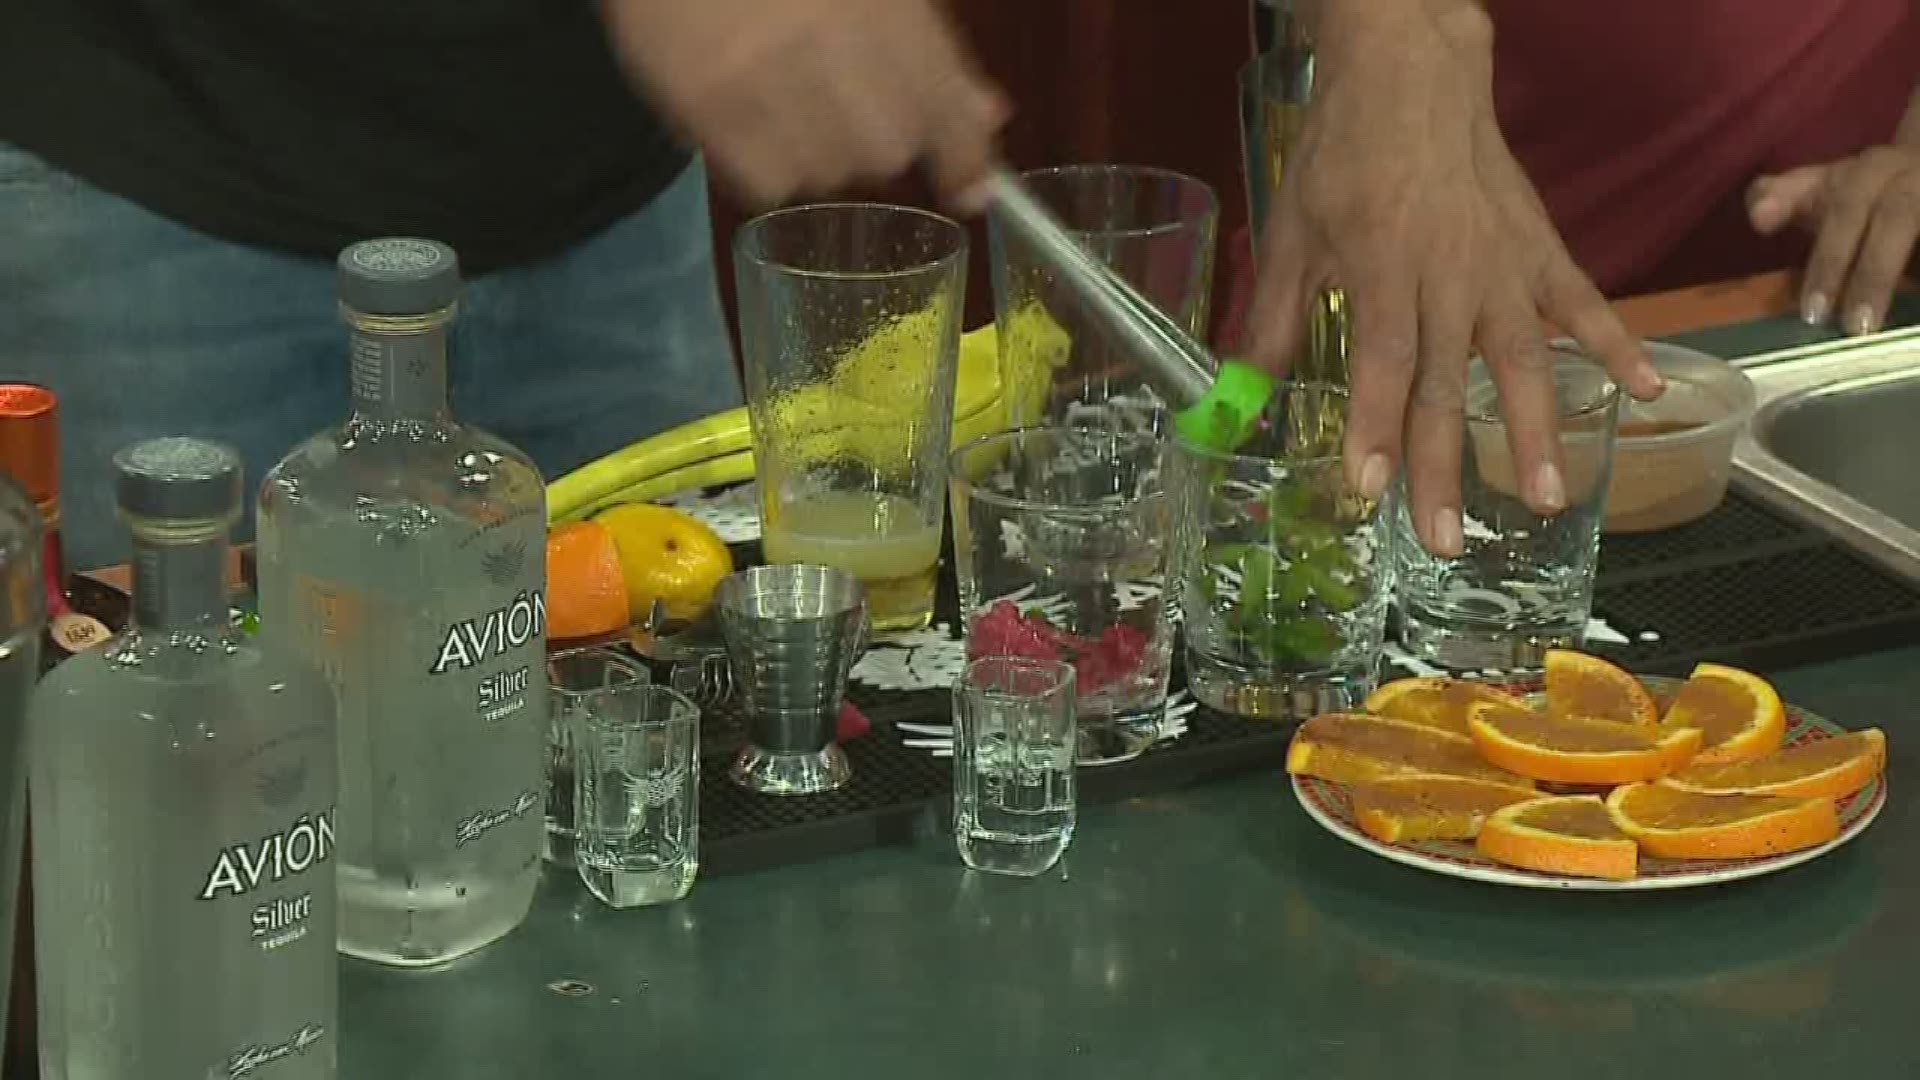 It is Cinco De Mayo and we are celebrating in the kitchen with New Orleans Drink Lab, and the owner Daniel Victory shows us how to make a classic margarita.